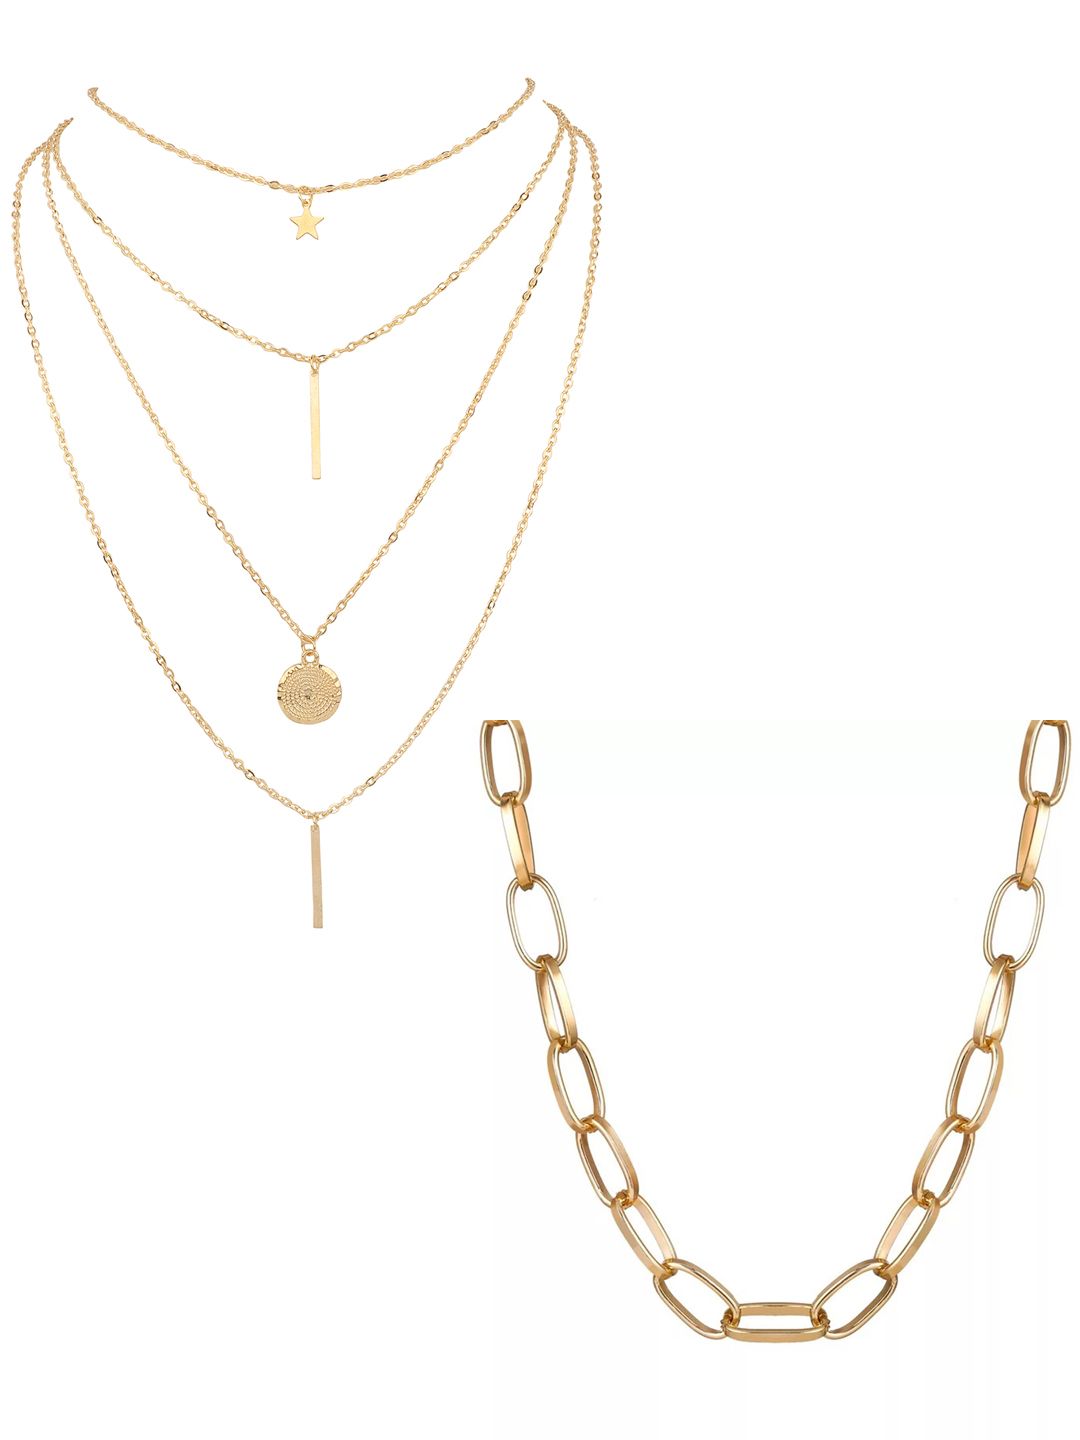 Vembley Set Of 2 Gold-Plated Star & Chunky Chain Necklace Price in India